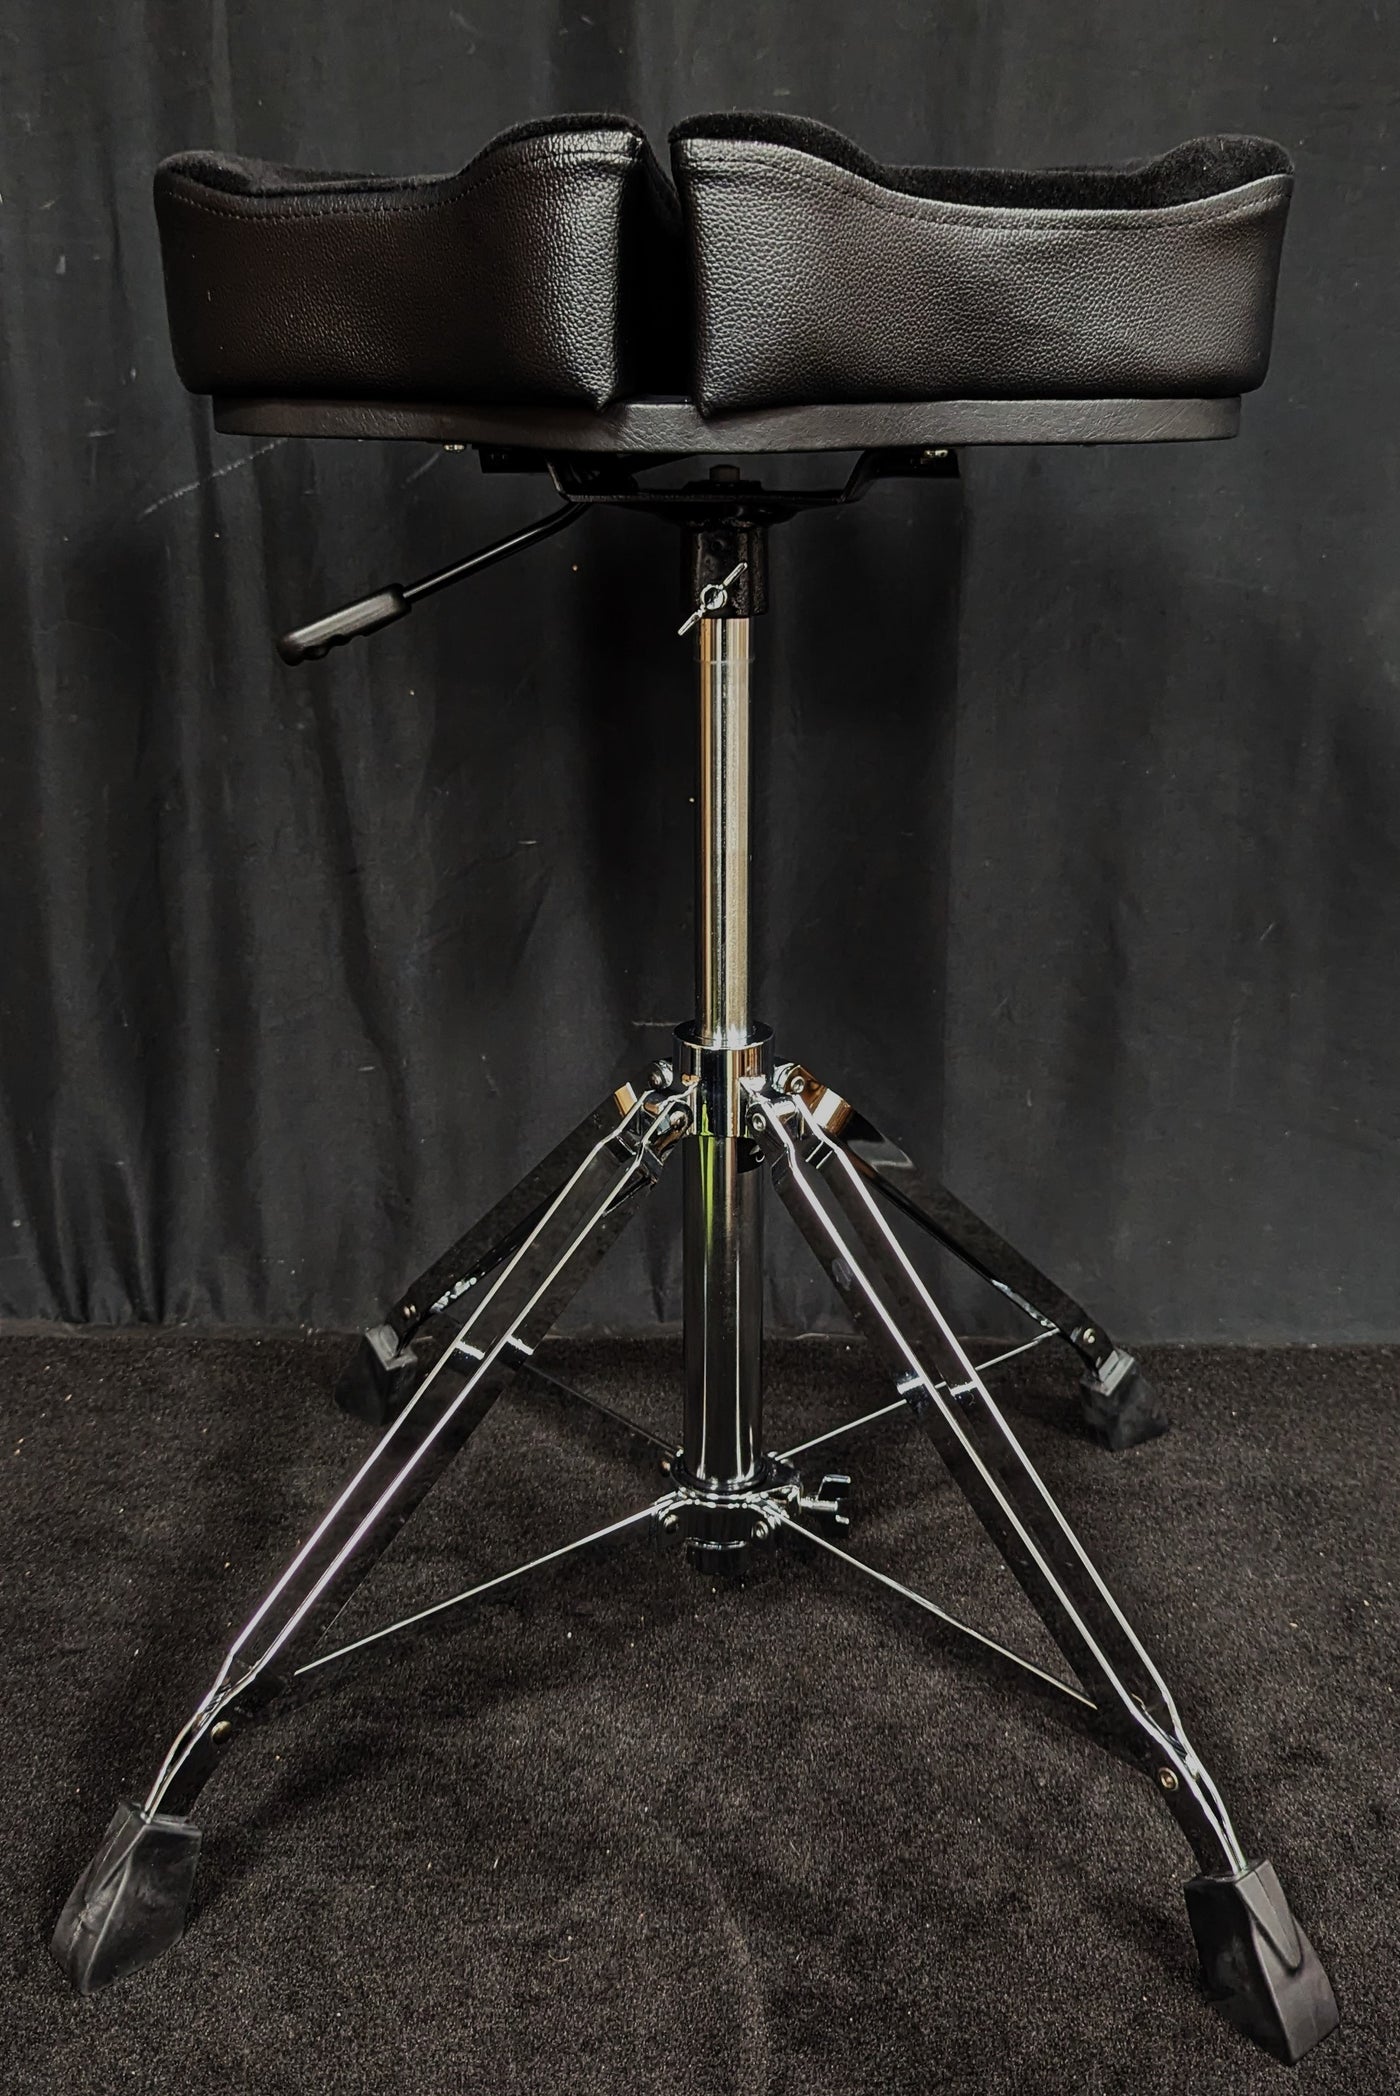 Spinal Glide Saddle Top Hydraulic Throne